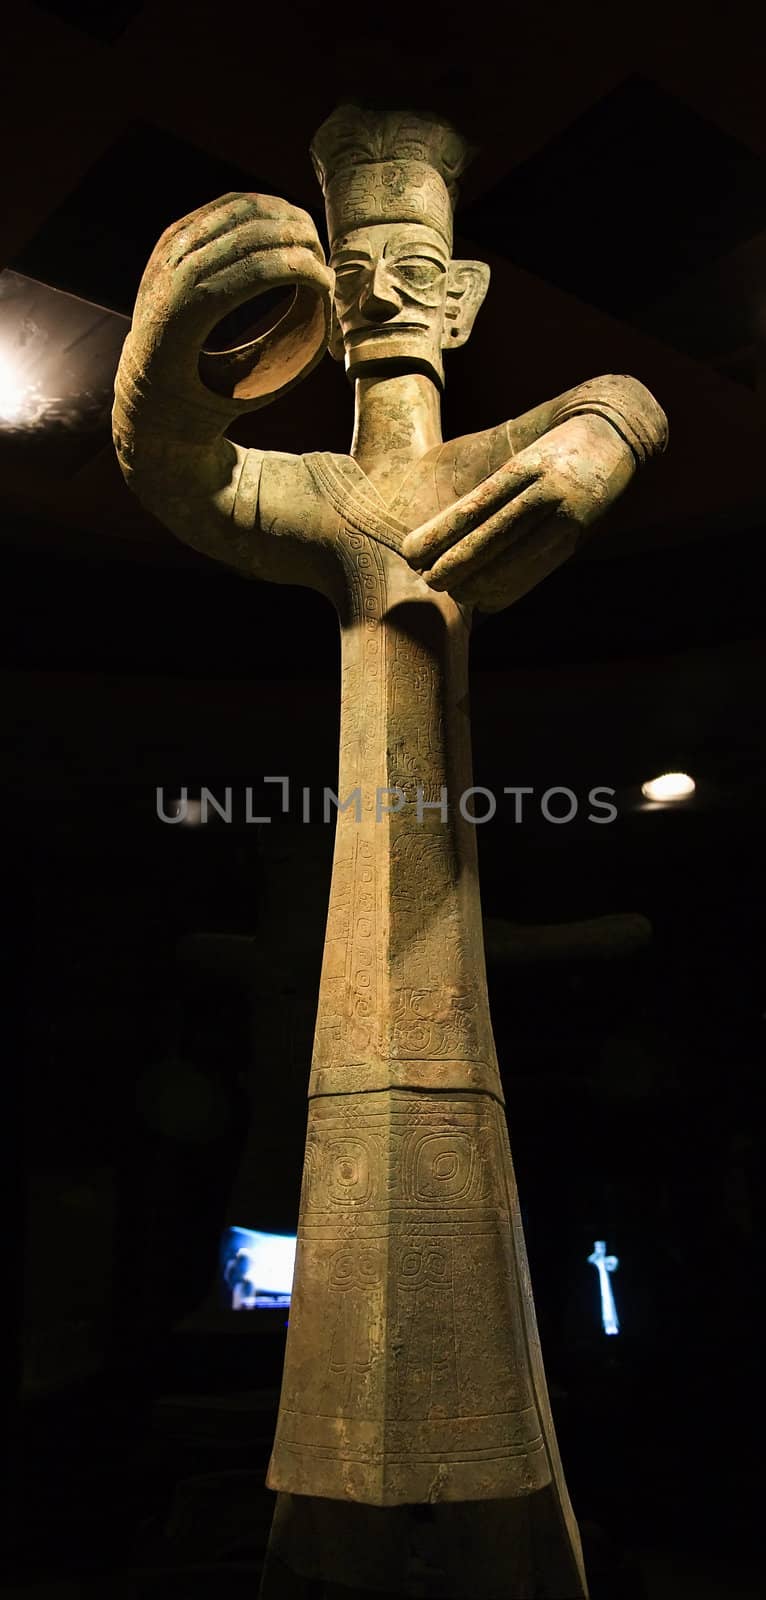 Tall Three Thousand Year Old Bronze Statue Sanxingdui Three Star Mound Museum Guanghan Chengdu Sichuan China This tall statue was discovered in a pit with elephant tusks.  The statues have been carbon dated to the 11th-12th Century BCE